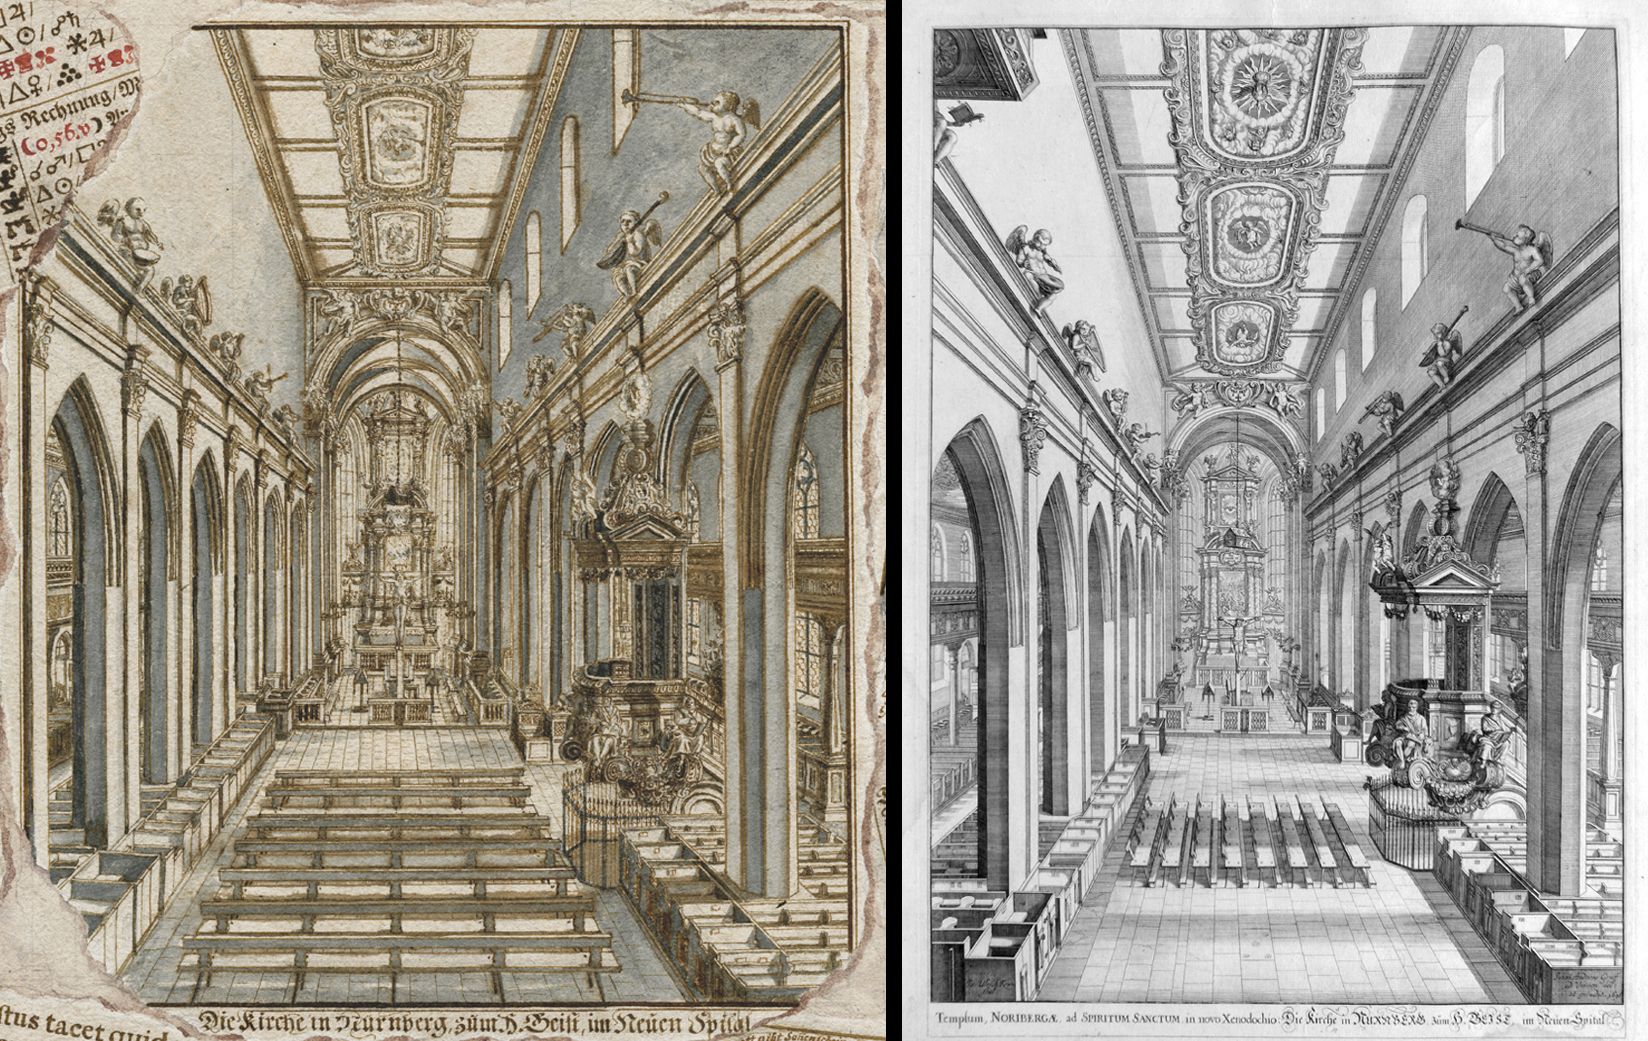 Quodlibet to the Holy Spirit Hospital Interior view of the Spitalkirche on the quodlibet, on the right the original by Johann Andreas Graff from 1696.